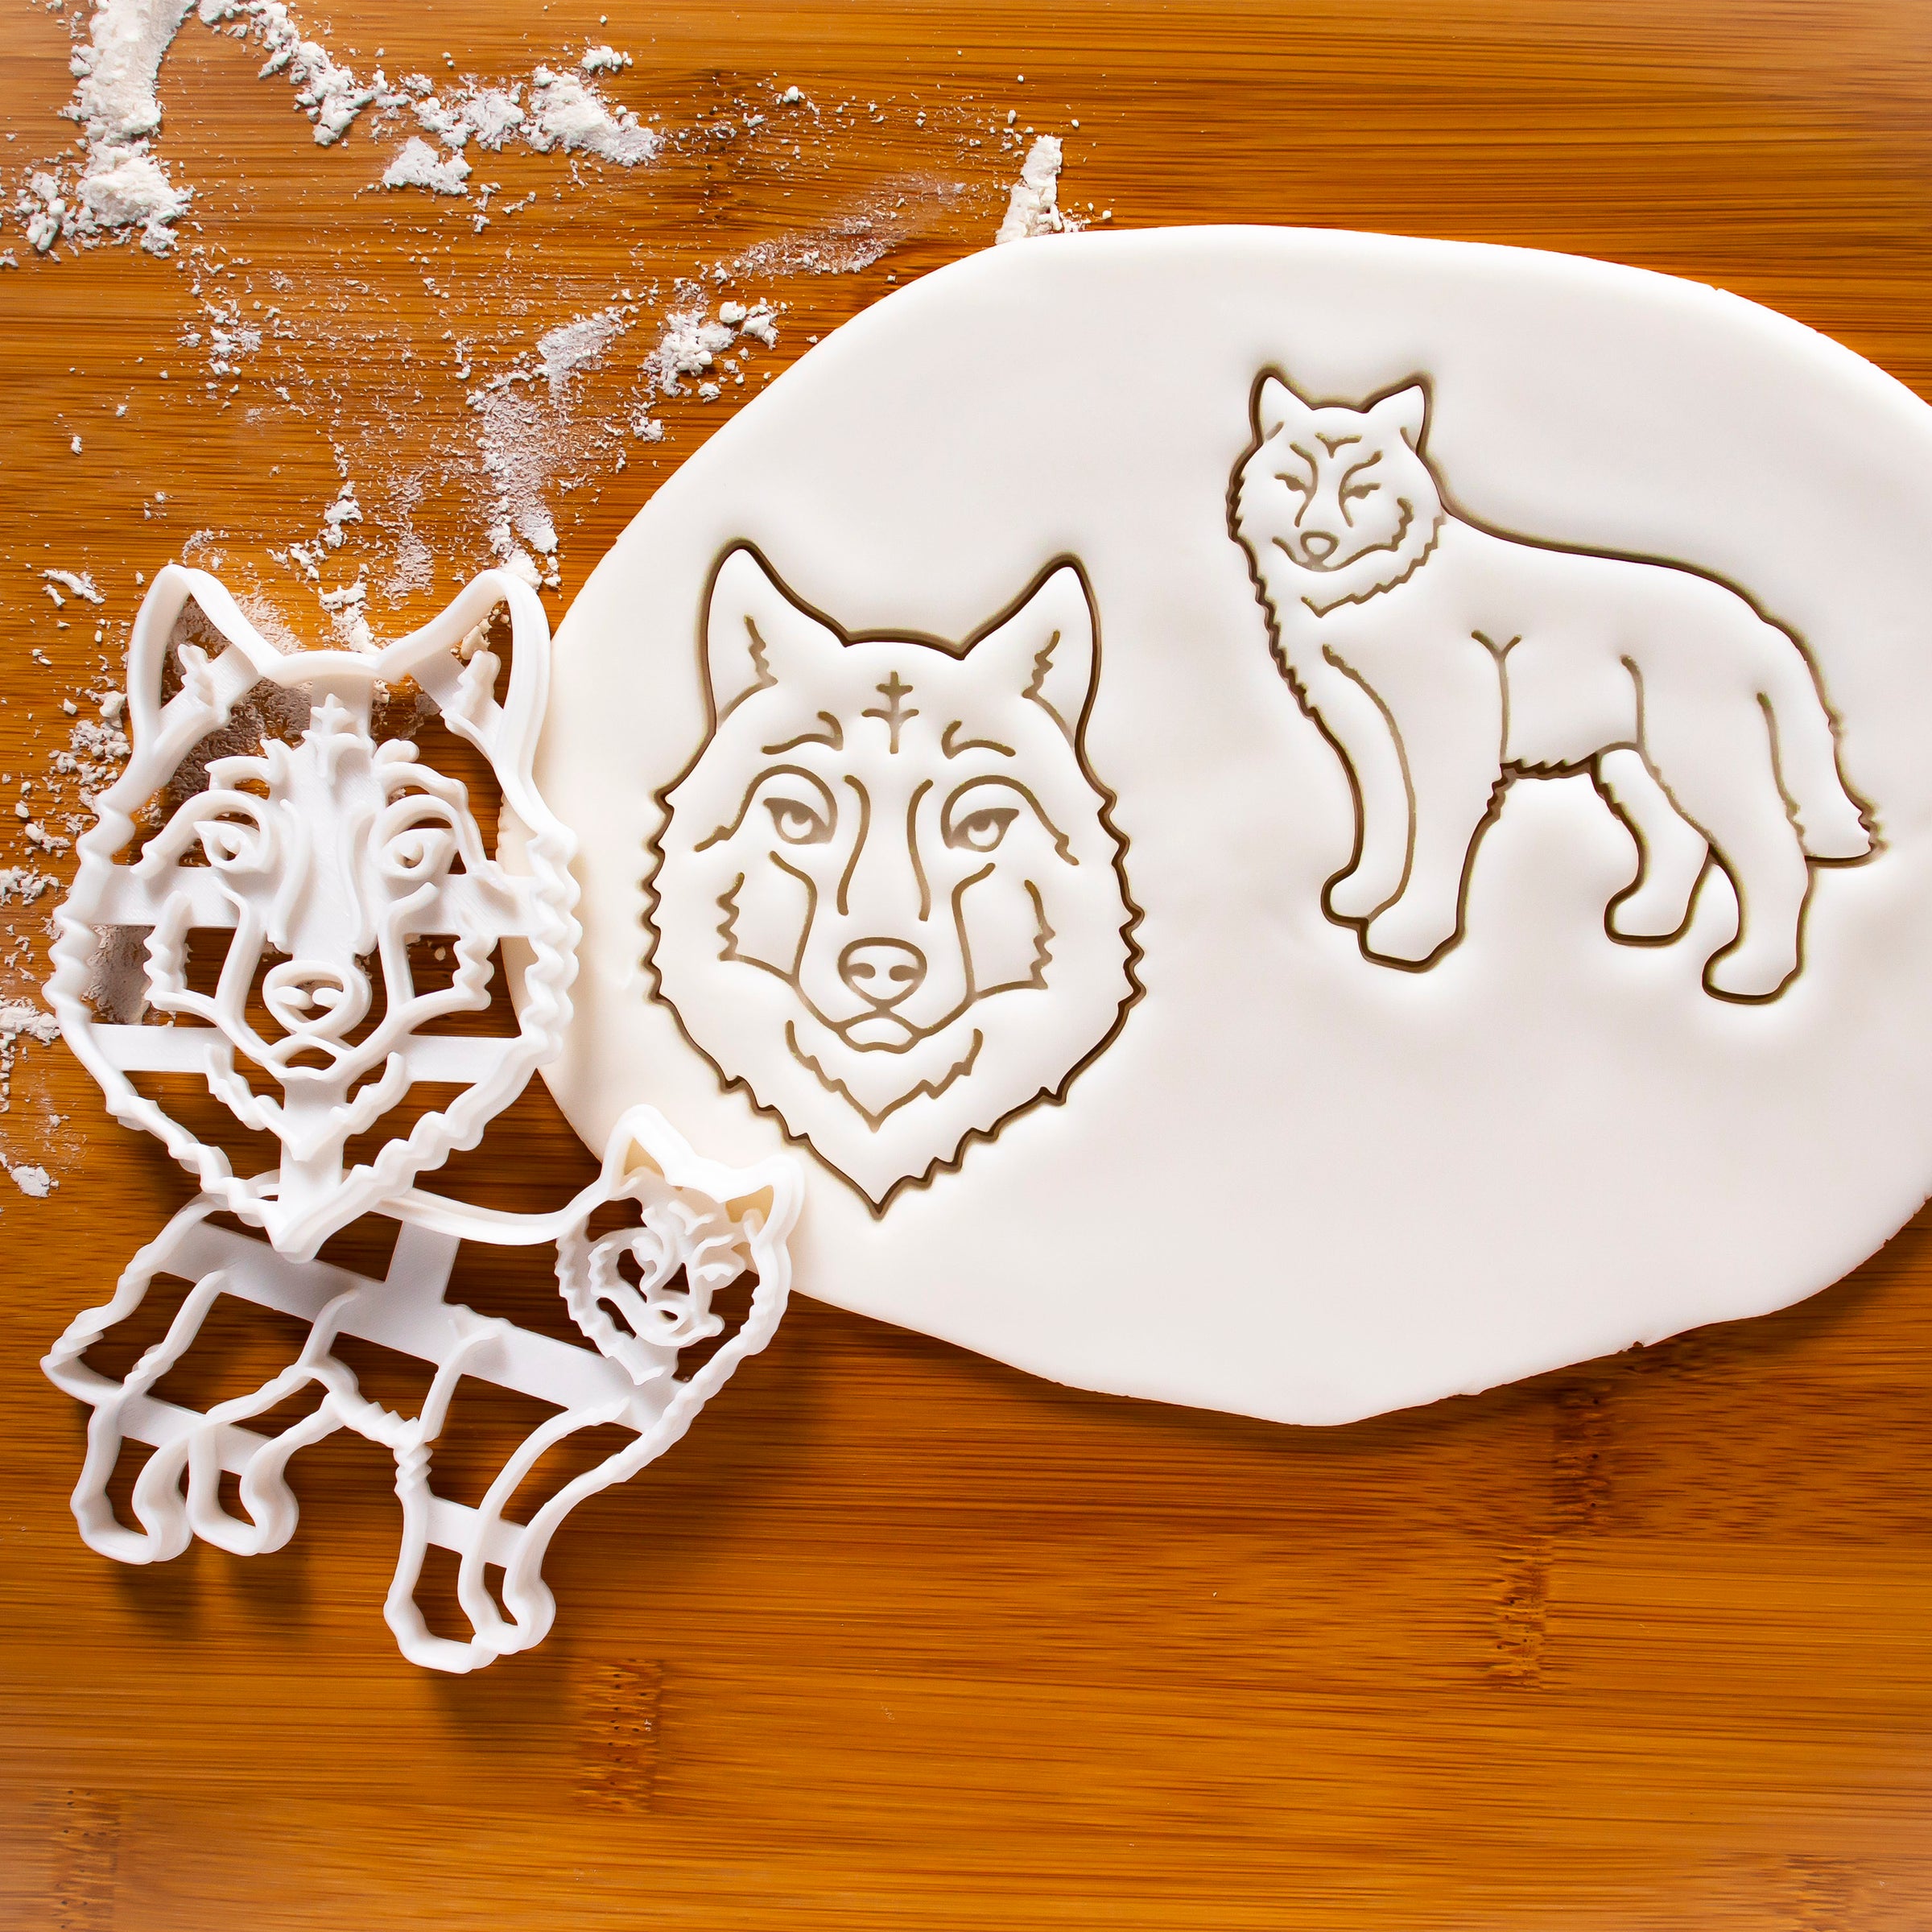 Set of 2 Wolf Cookie Cutters: Face and Body